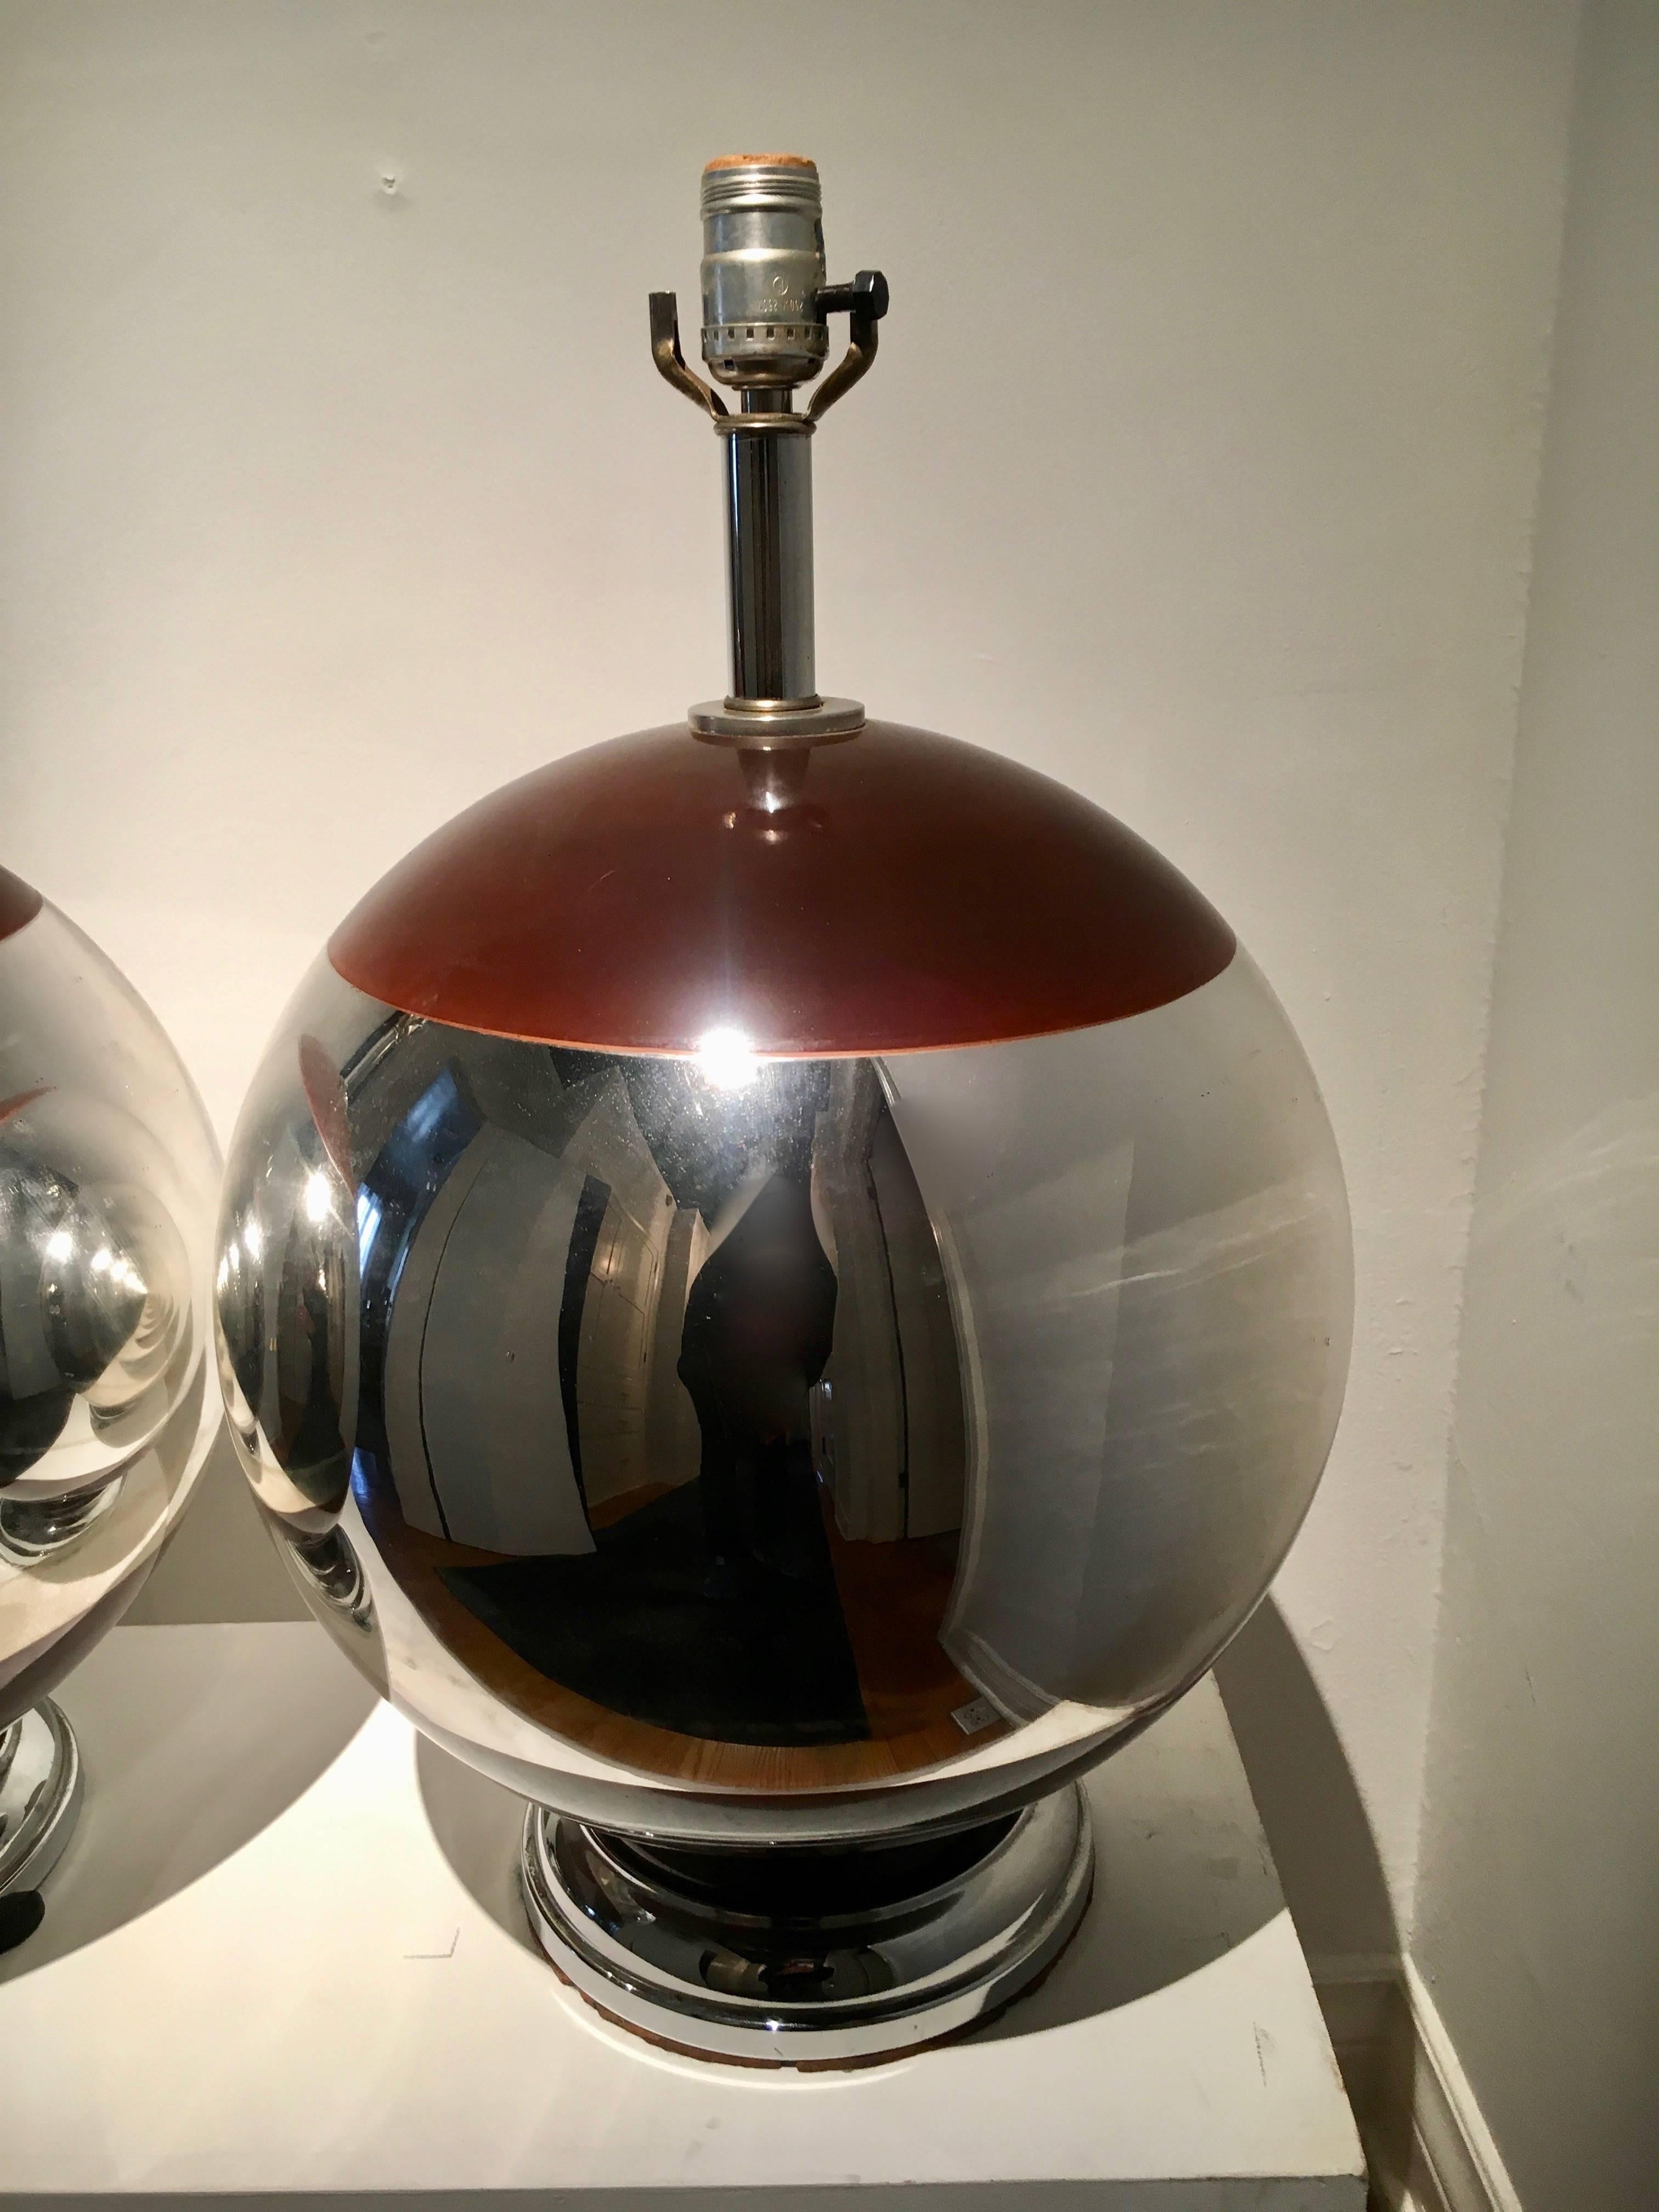 Pair of spherical Mercury lamps with brown detailing. Midcentury pair with brown top and bottom of sphere. Perfect for any room, modern or midcentury.

Measures: 13.5